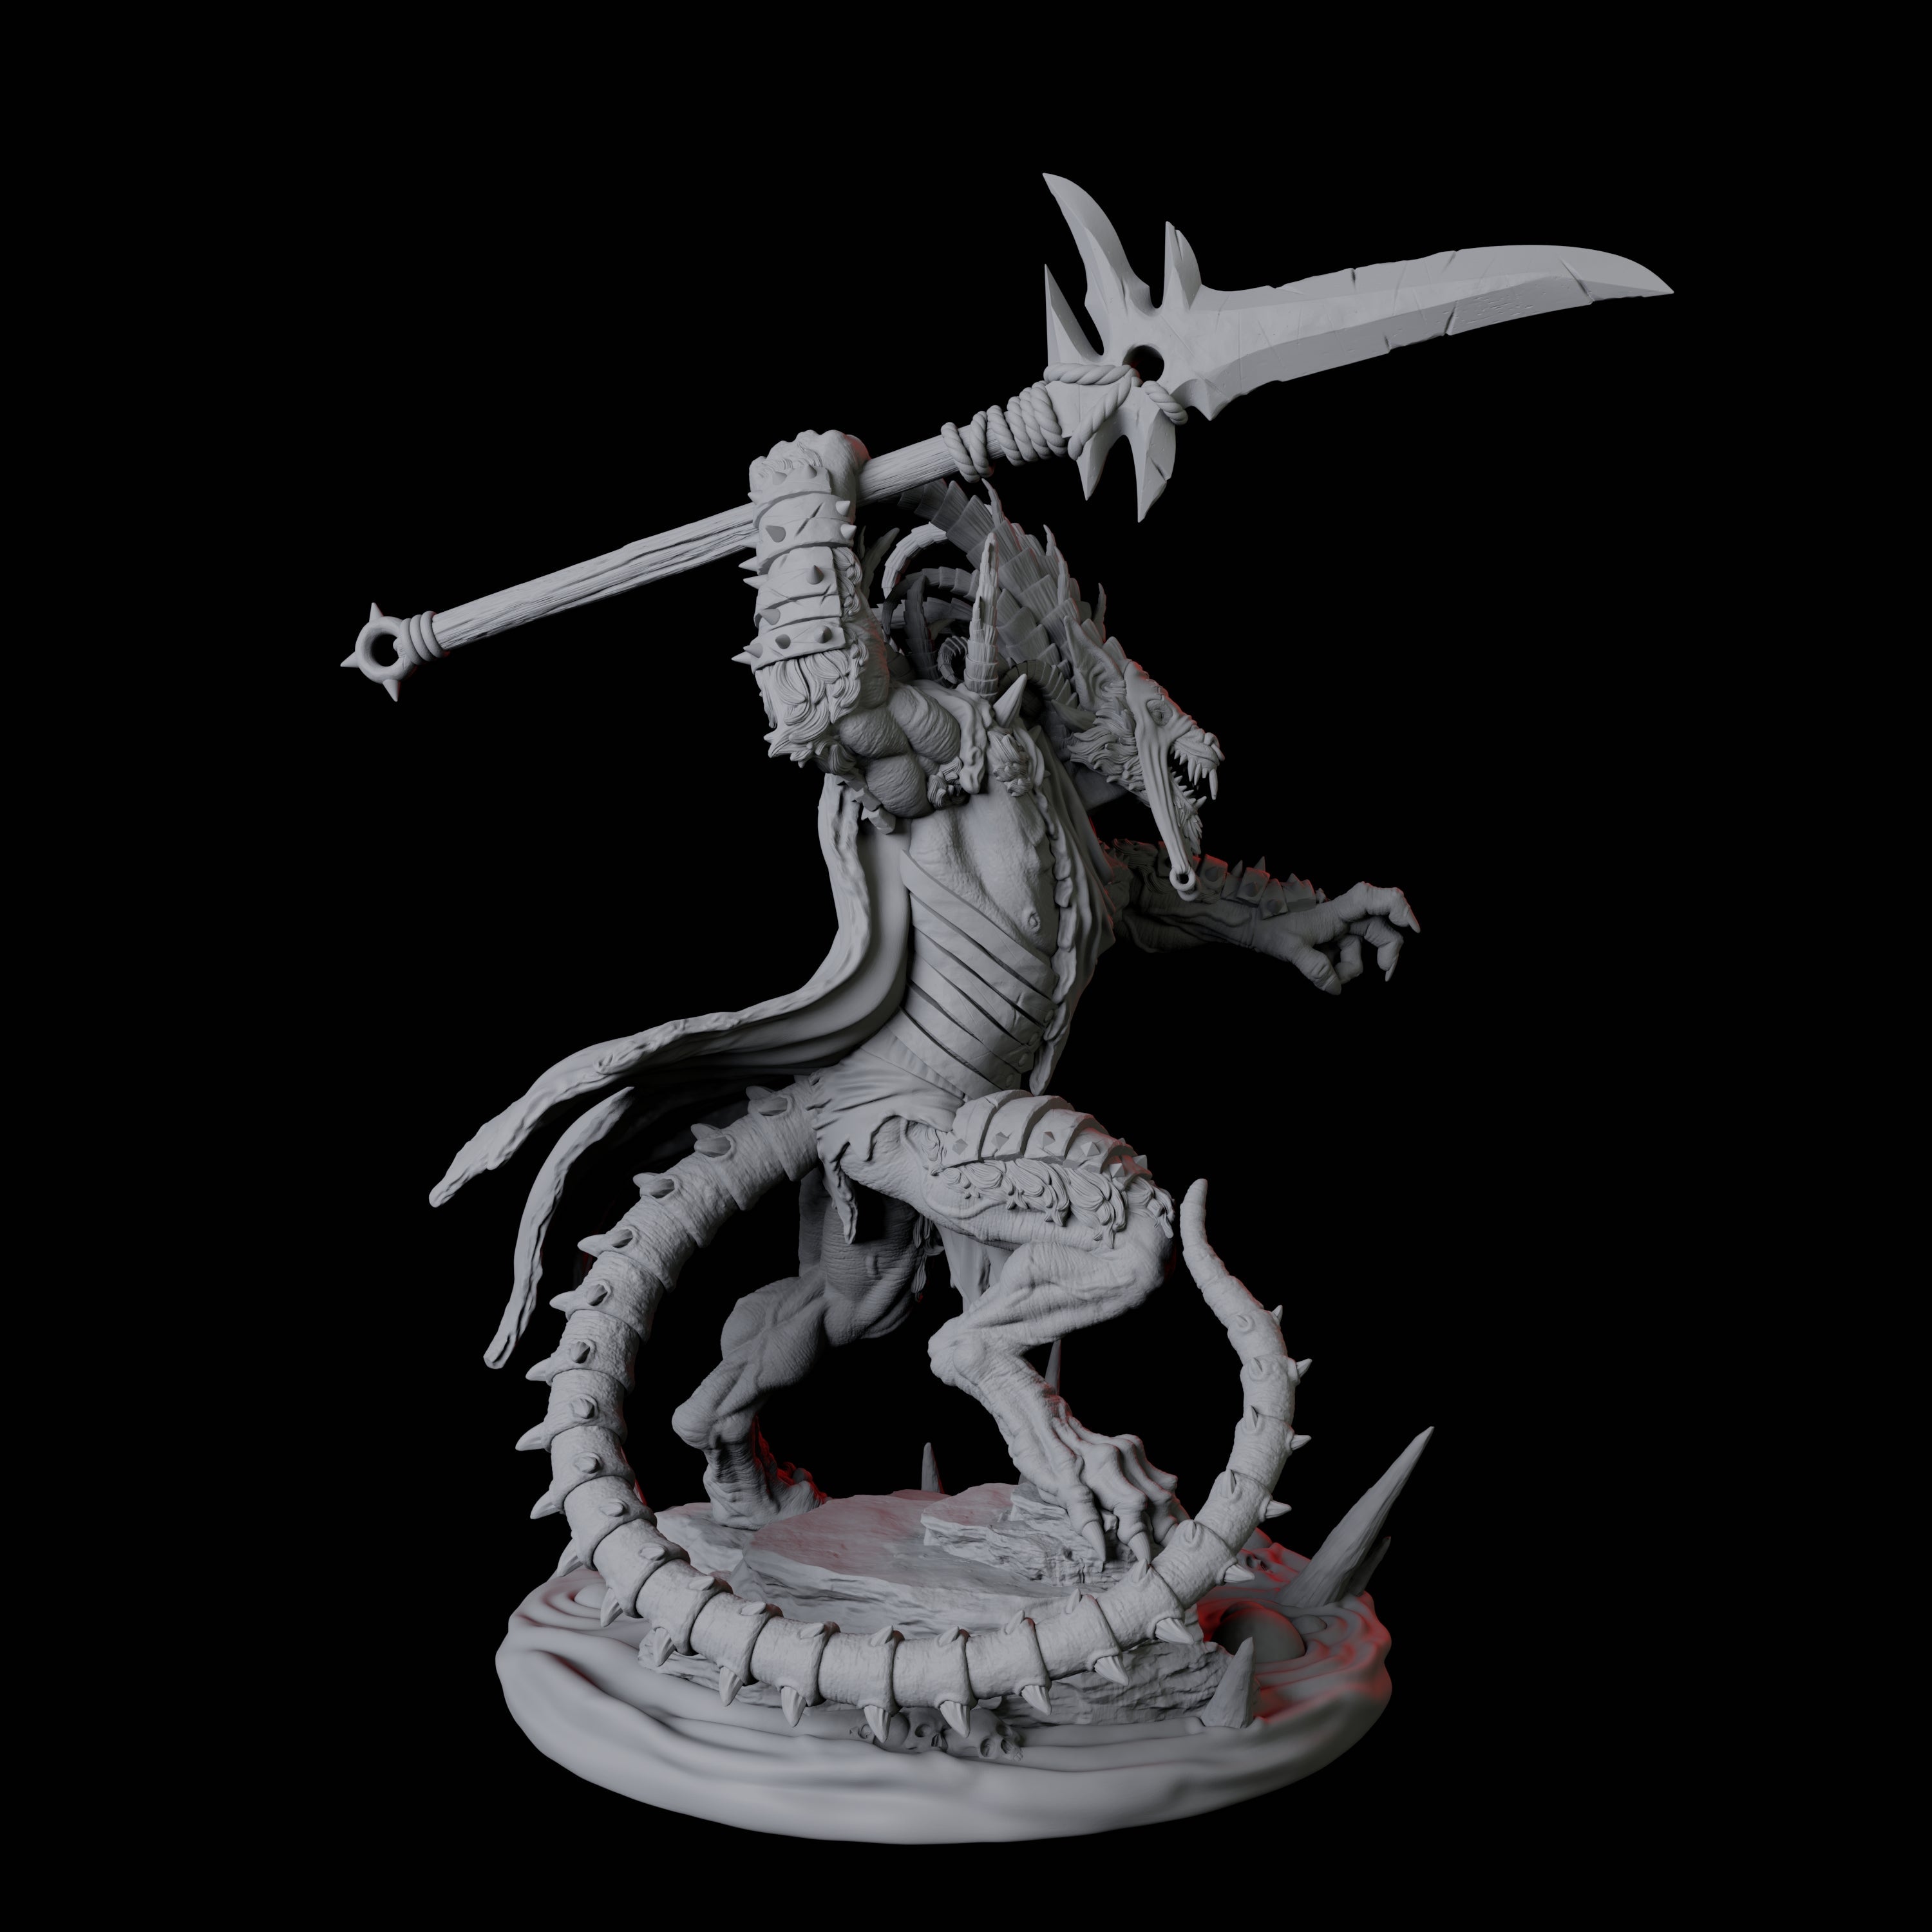 Ratfolk Filth Paladin C Miniature for Dungeons and Dragons, Pathfinder or other TTRPGs